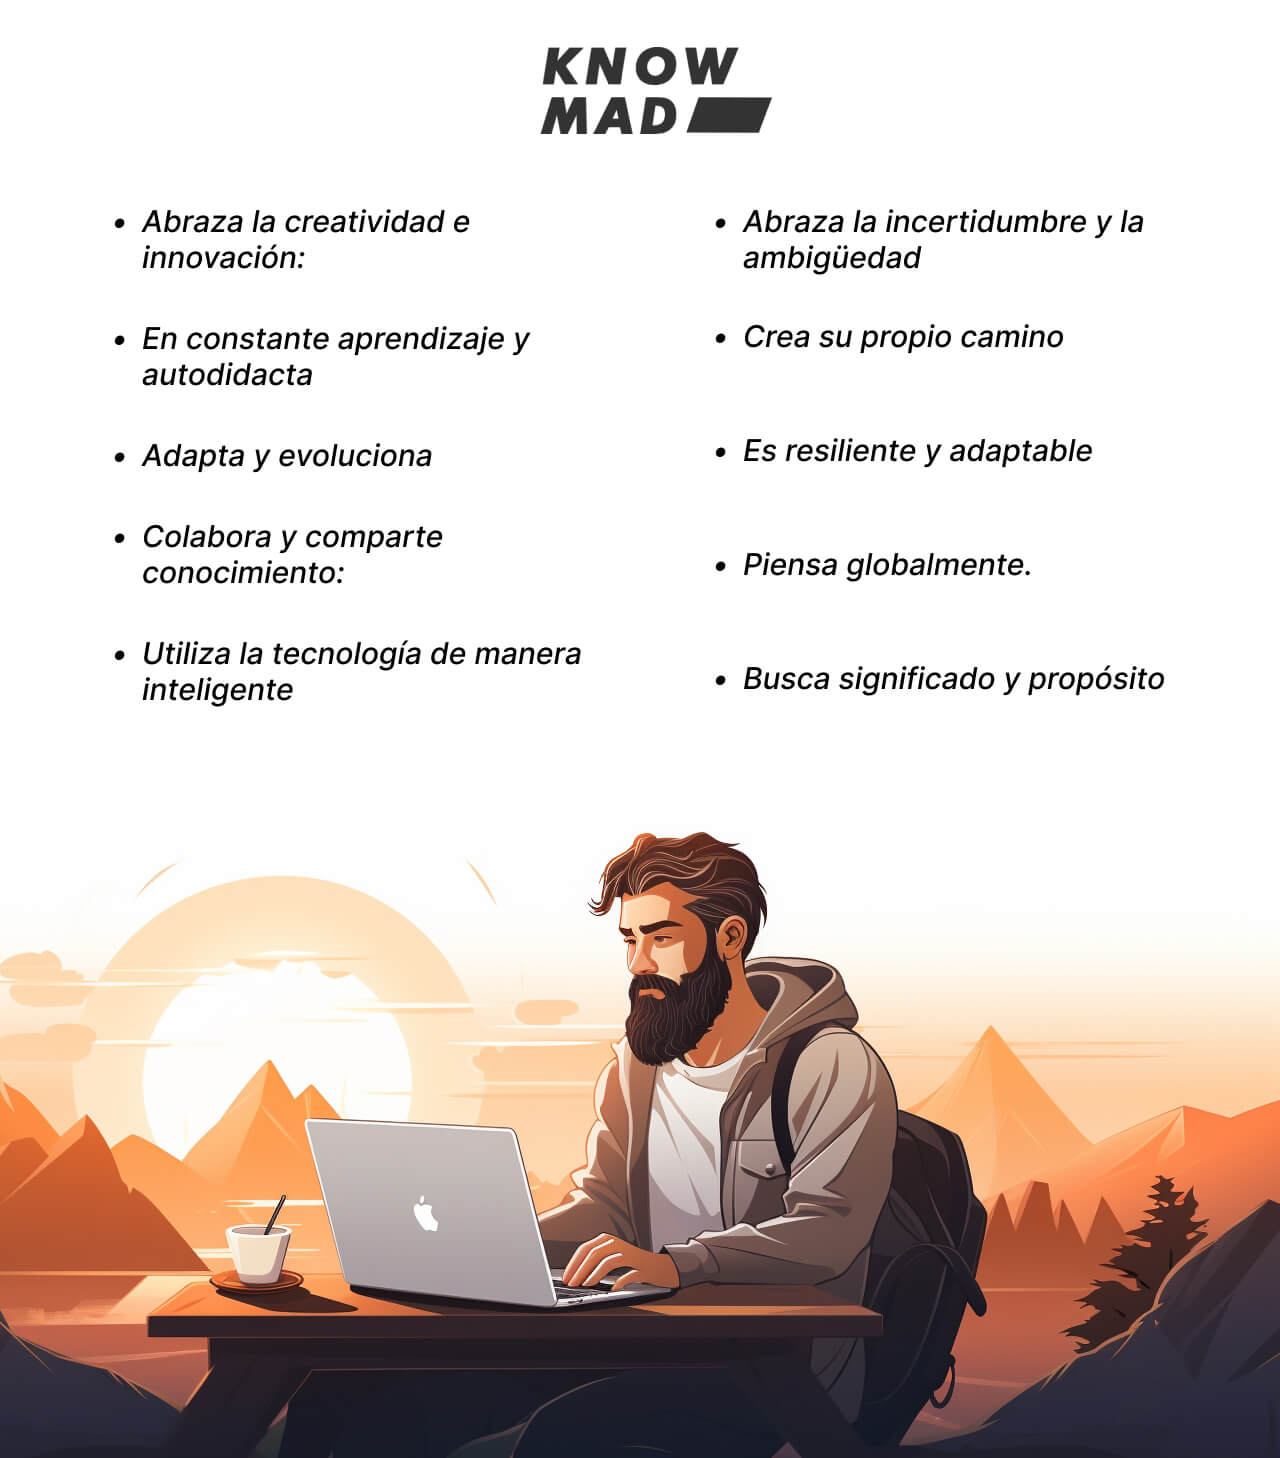 Manifiesto Knowmad